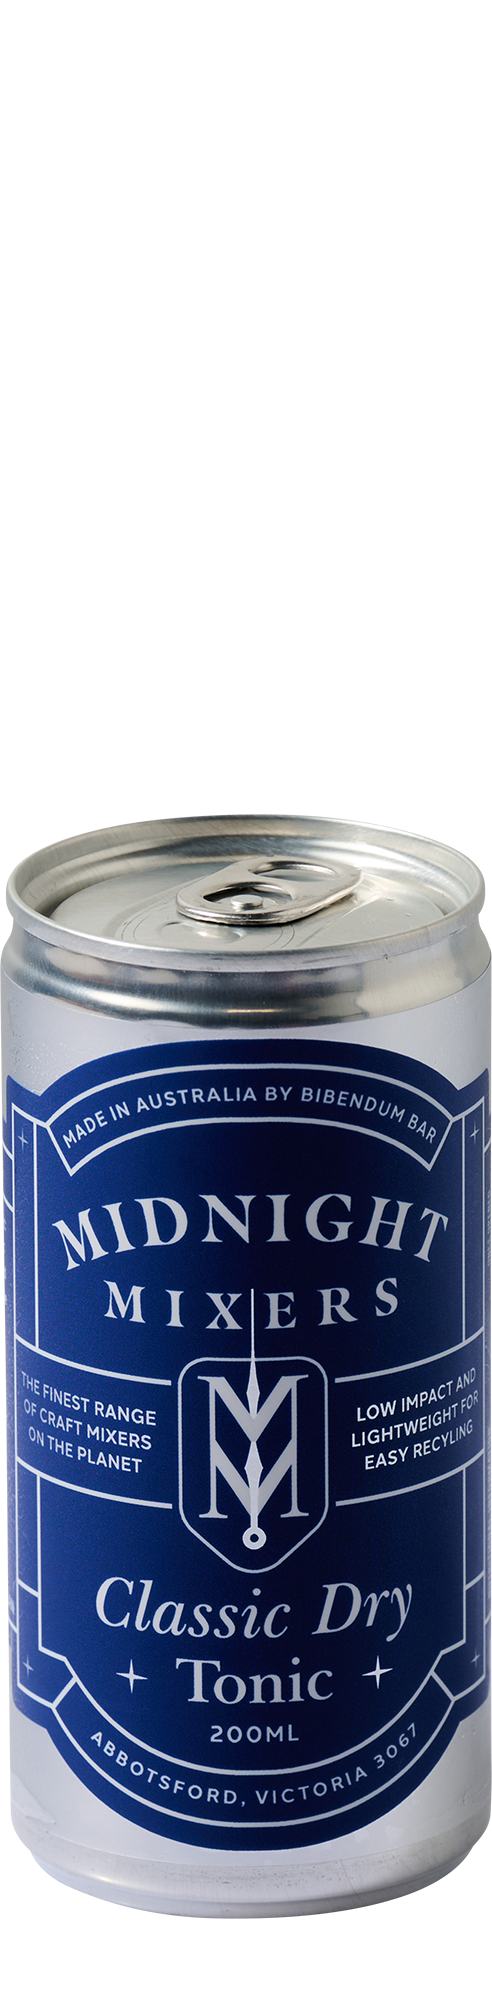 Midnight Mixers Classic Dry Tonic 24 pack  (ON PREM)